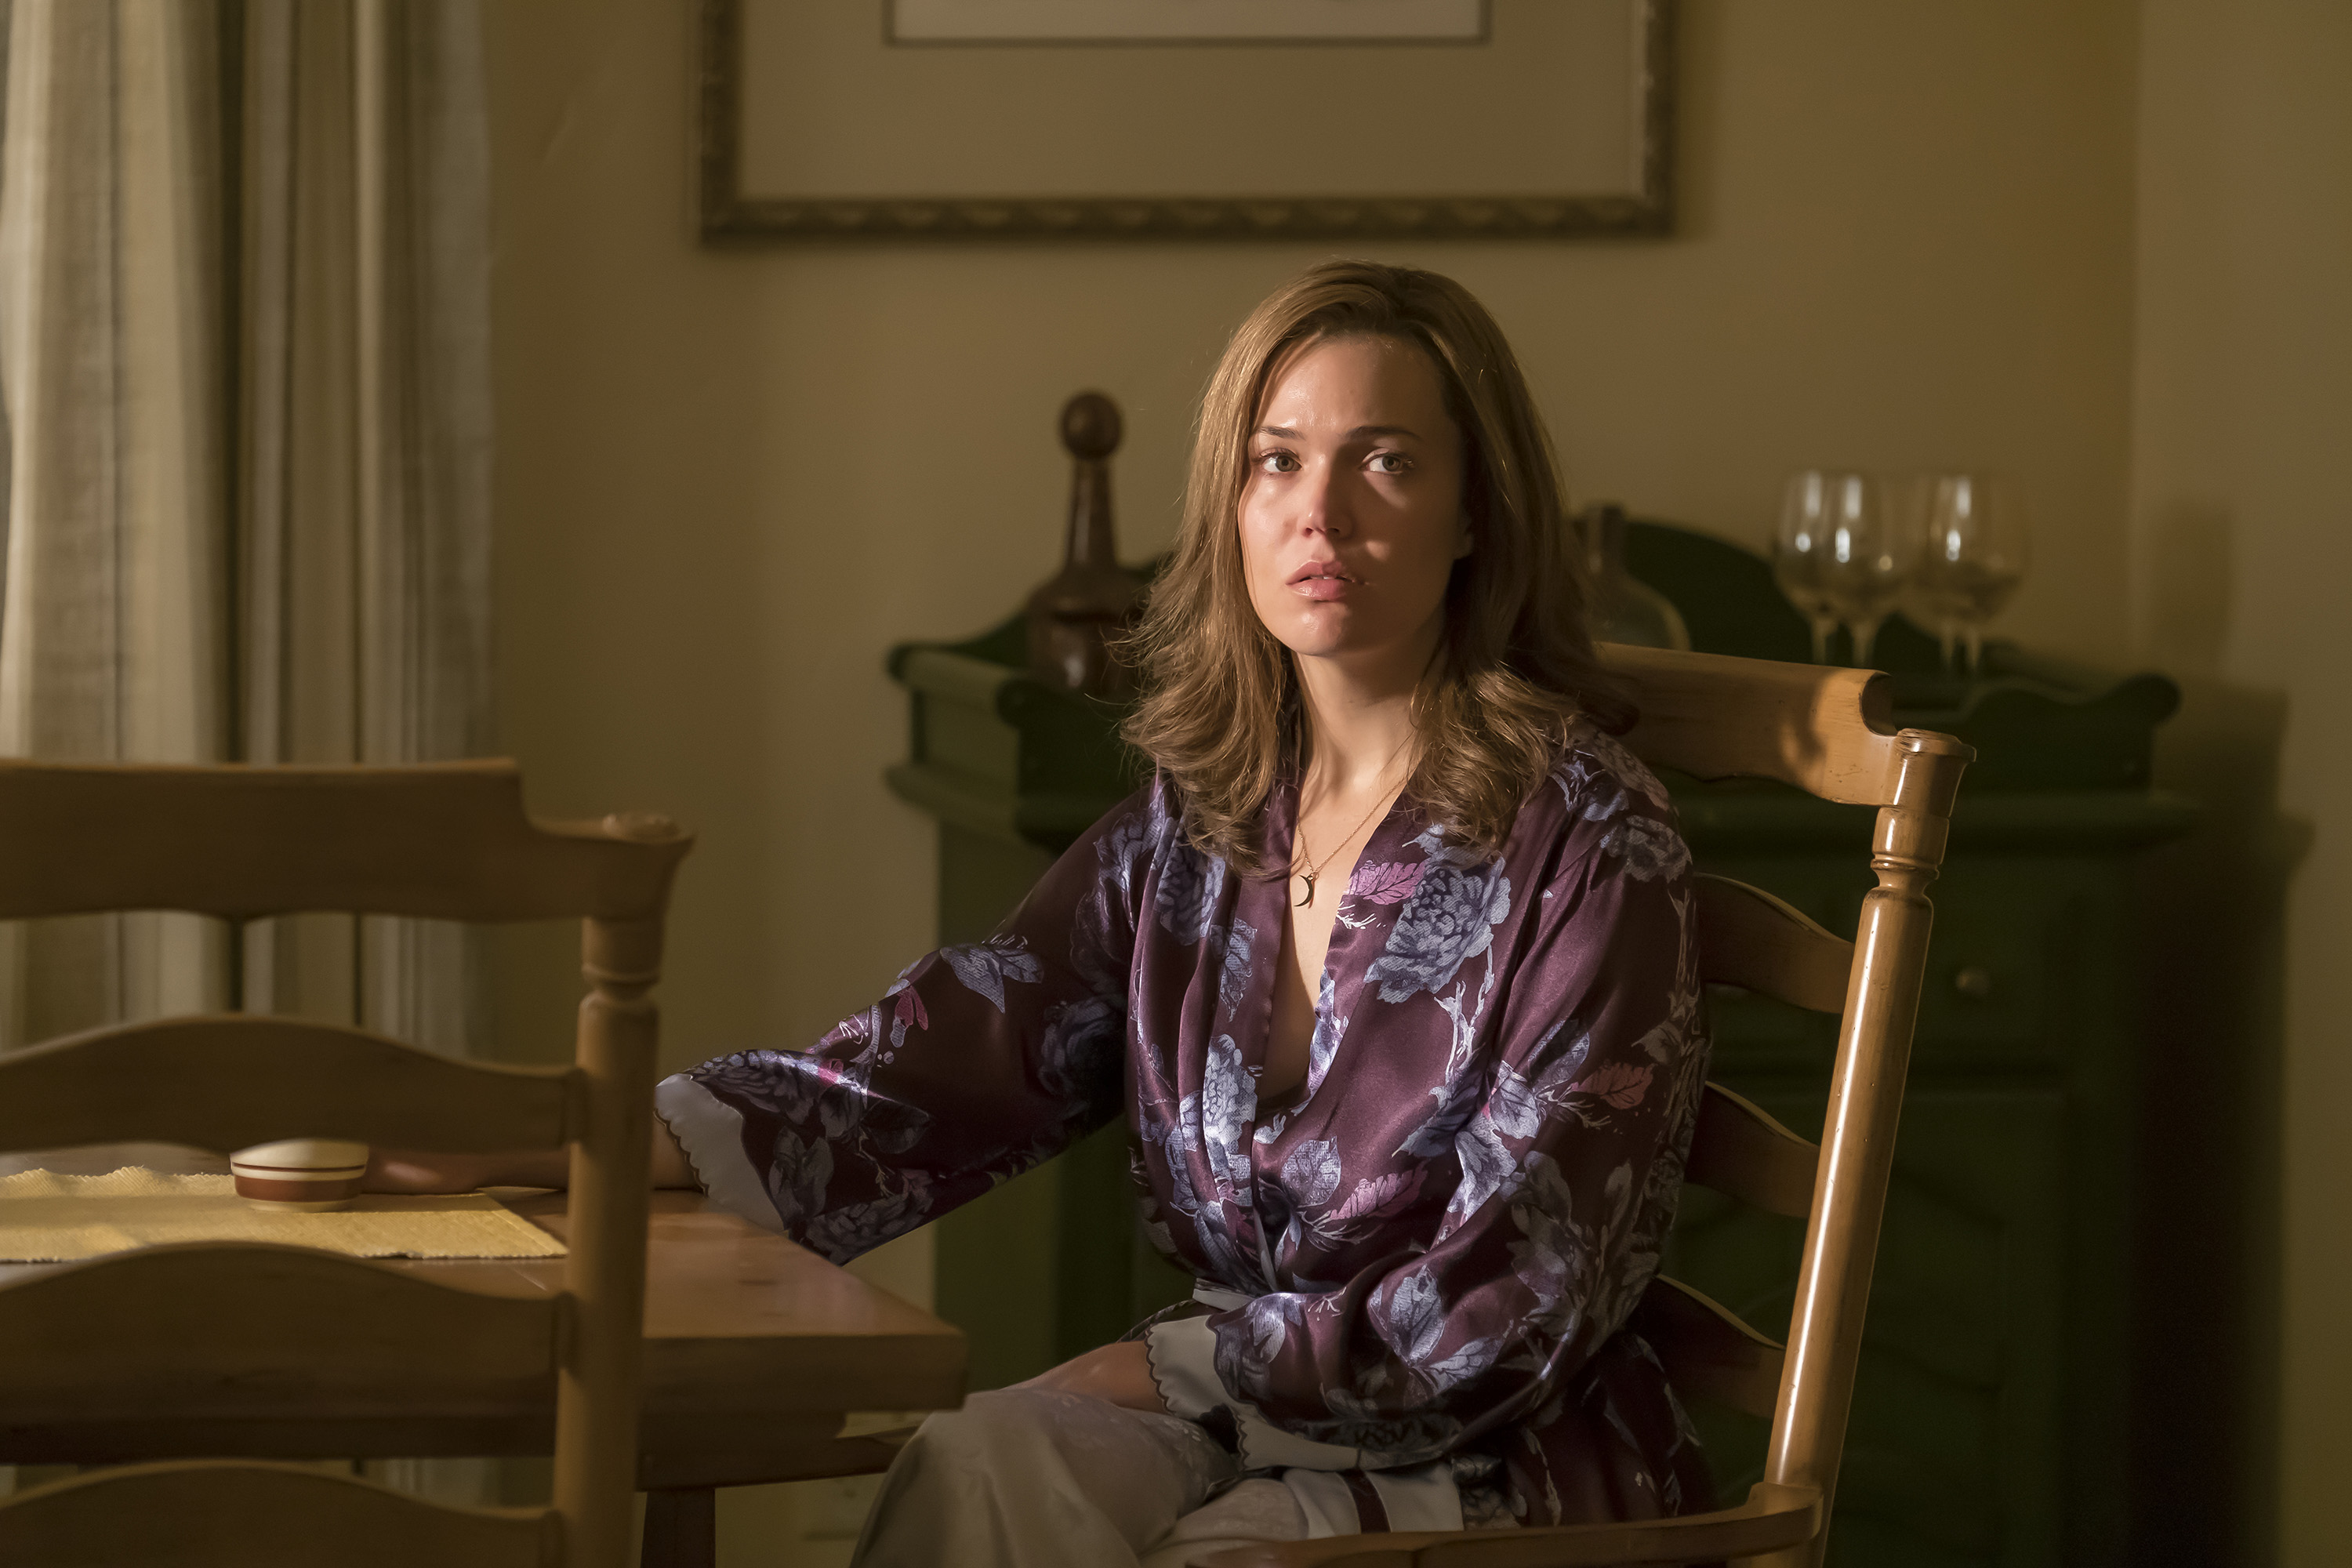 Mandy Moore, in character as Rebecca Pearson in 'This Is Us' Season 1, sits at the dining room table wearing a purple robe with blue flowers on it.